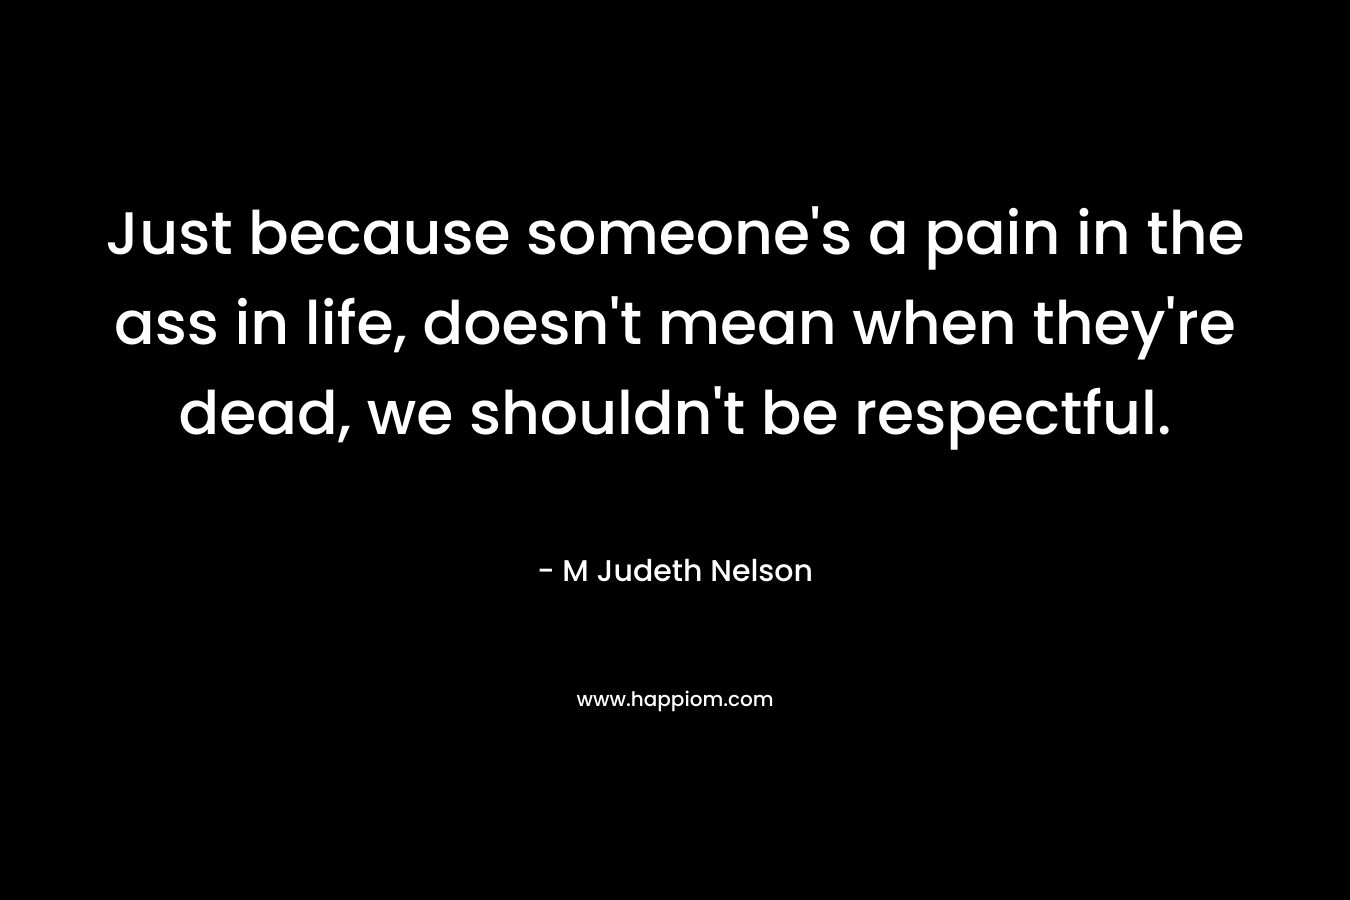 Just because someone’s a pain in the ass in life, doesn’t mean when they’re dead, we shouldn’t be respectful. – M Judeth Nelson